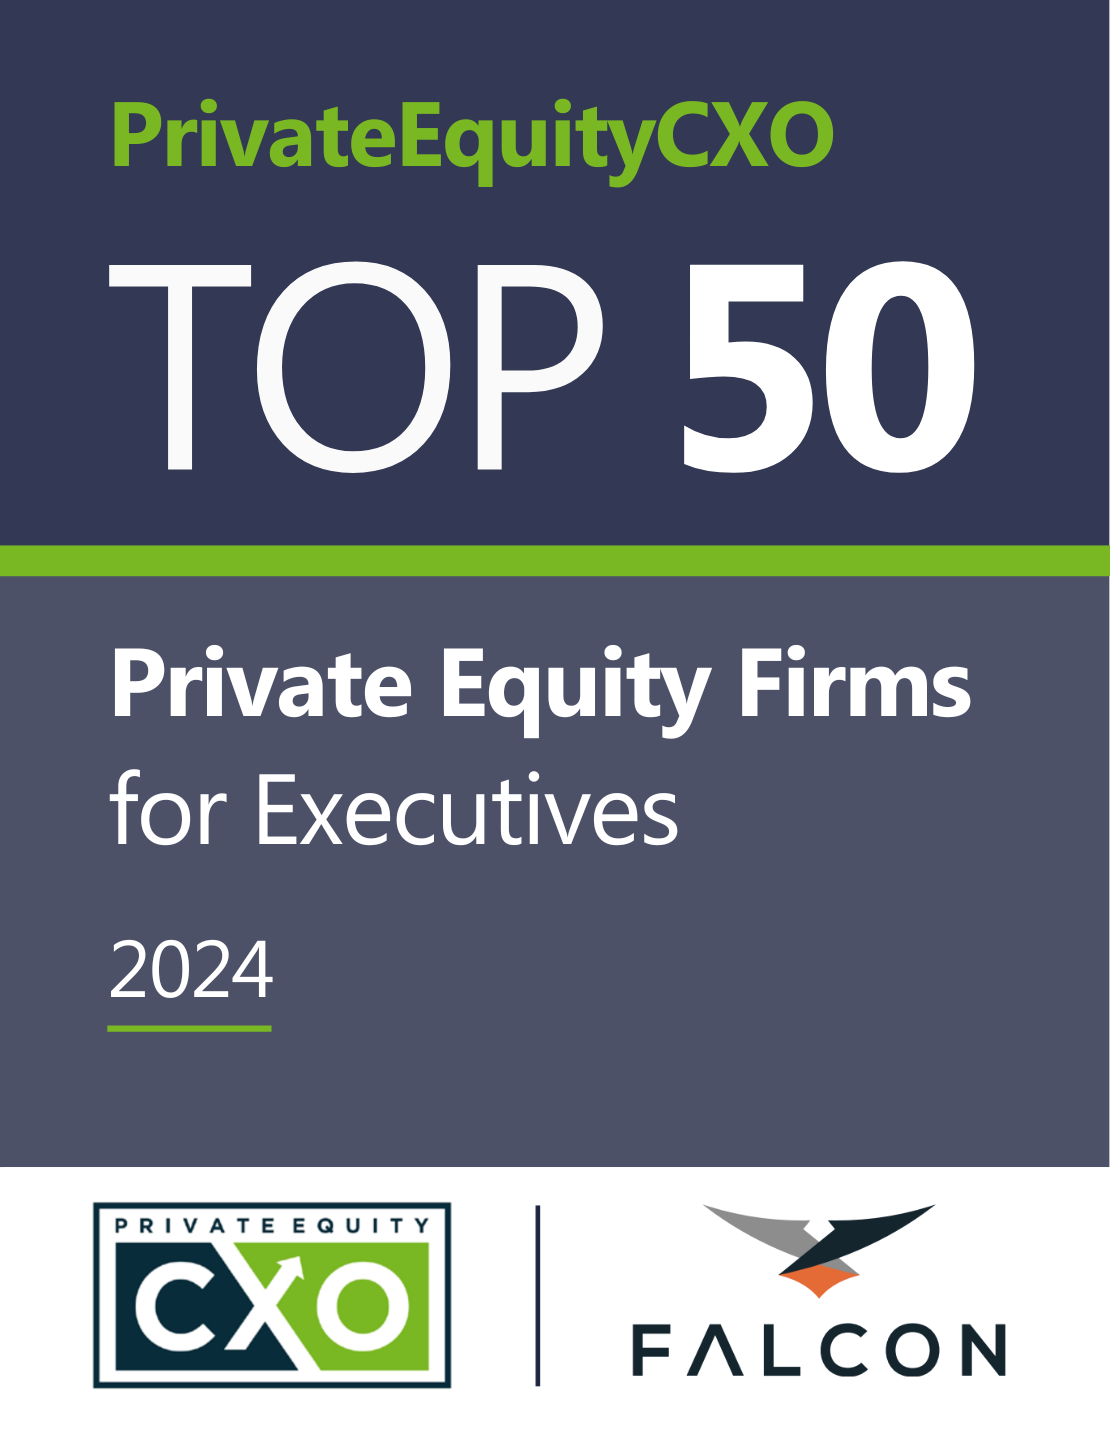 GenNx360 Capital Partners Honored as One of the Top 50 Private Equity Firms for Executives